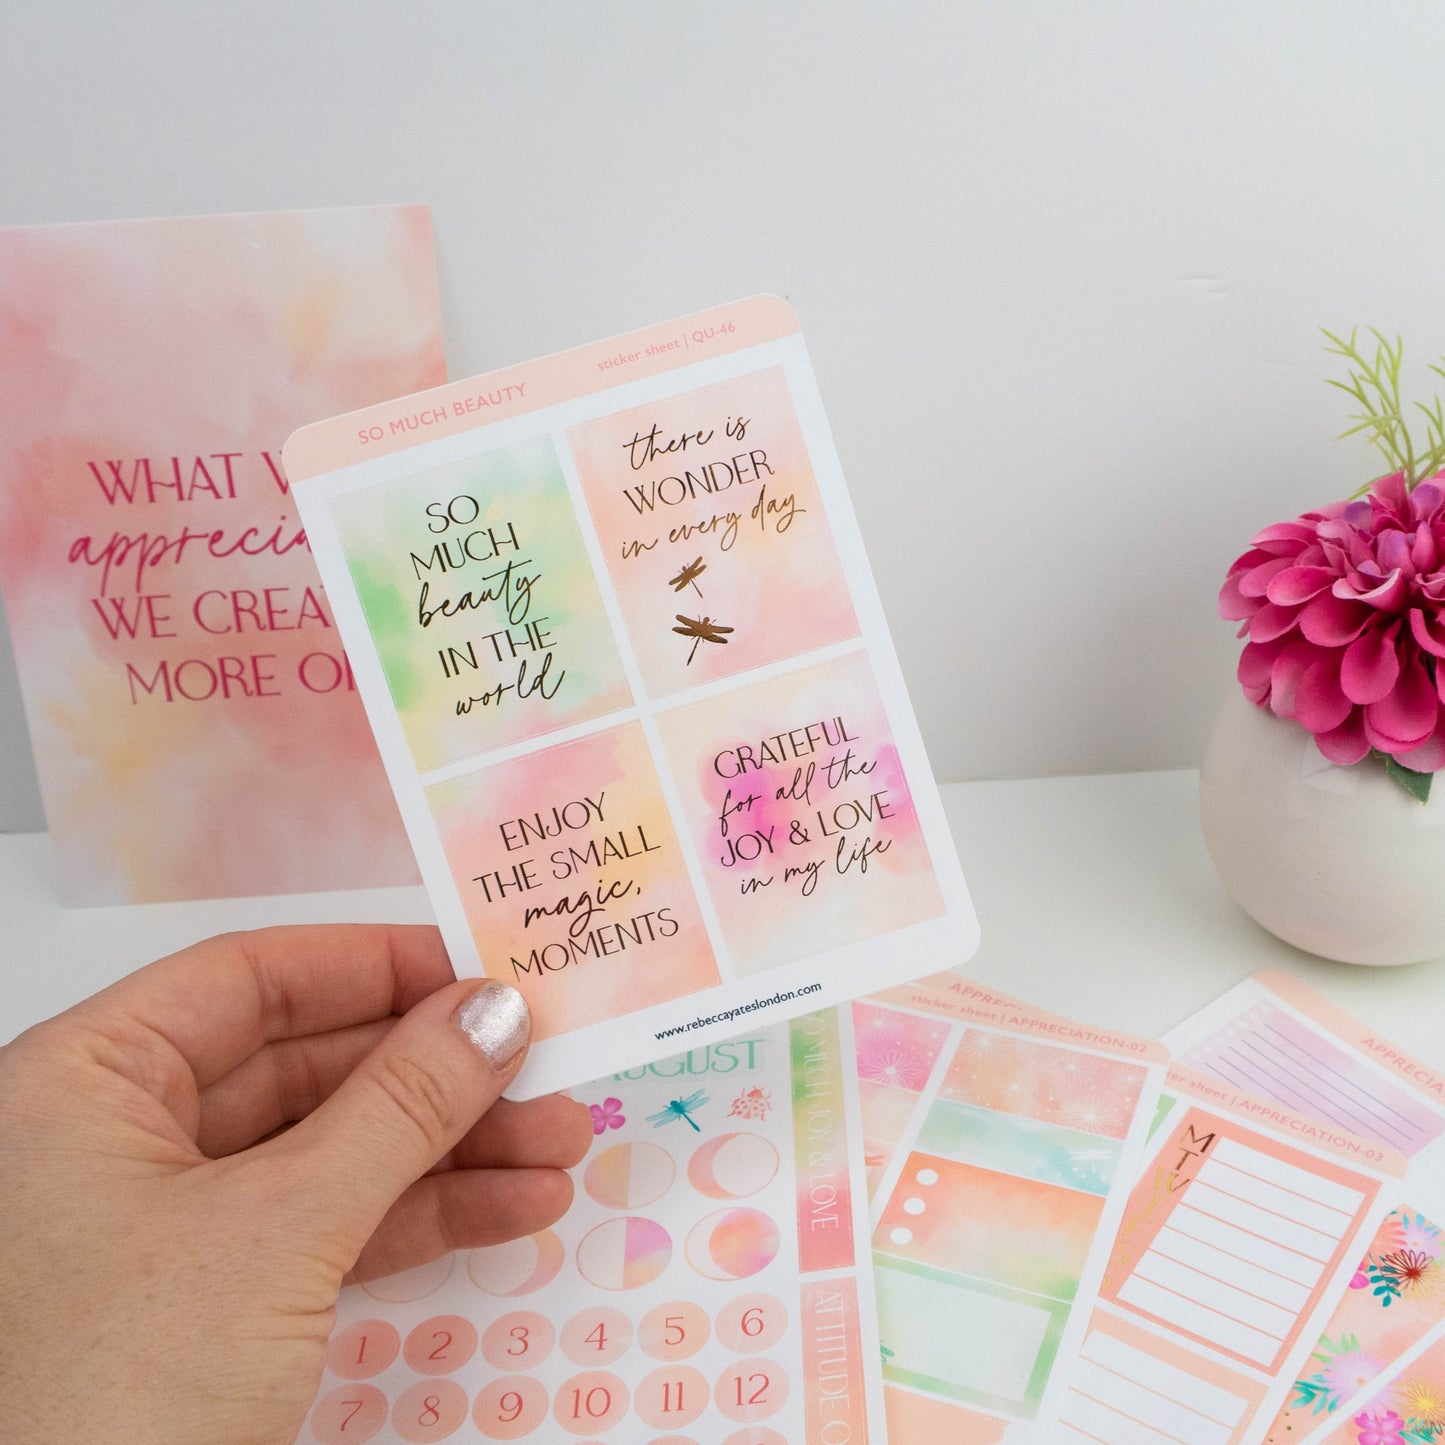 SO MUCH BEAUTY - FOILED PLANNER STICKER QUOTES